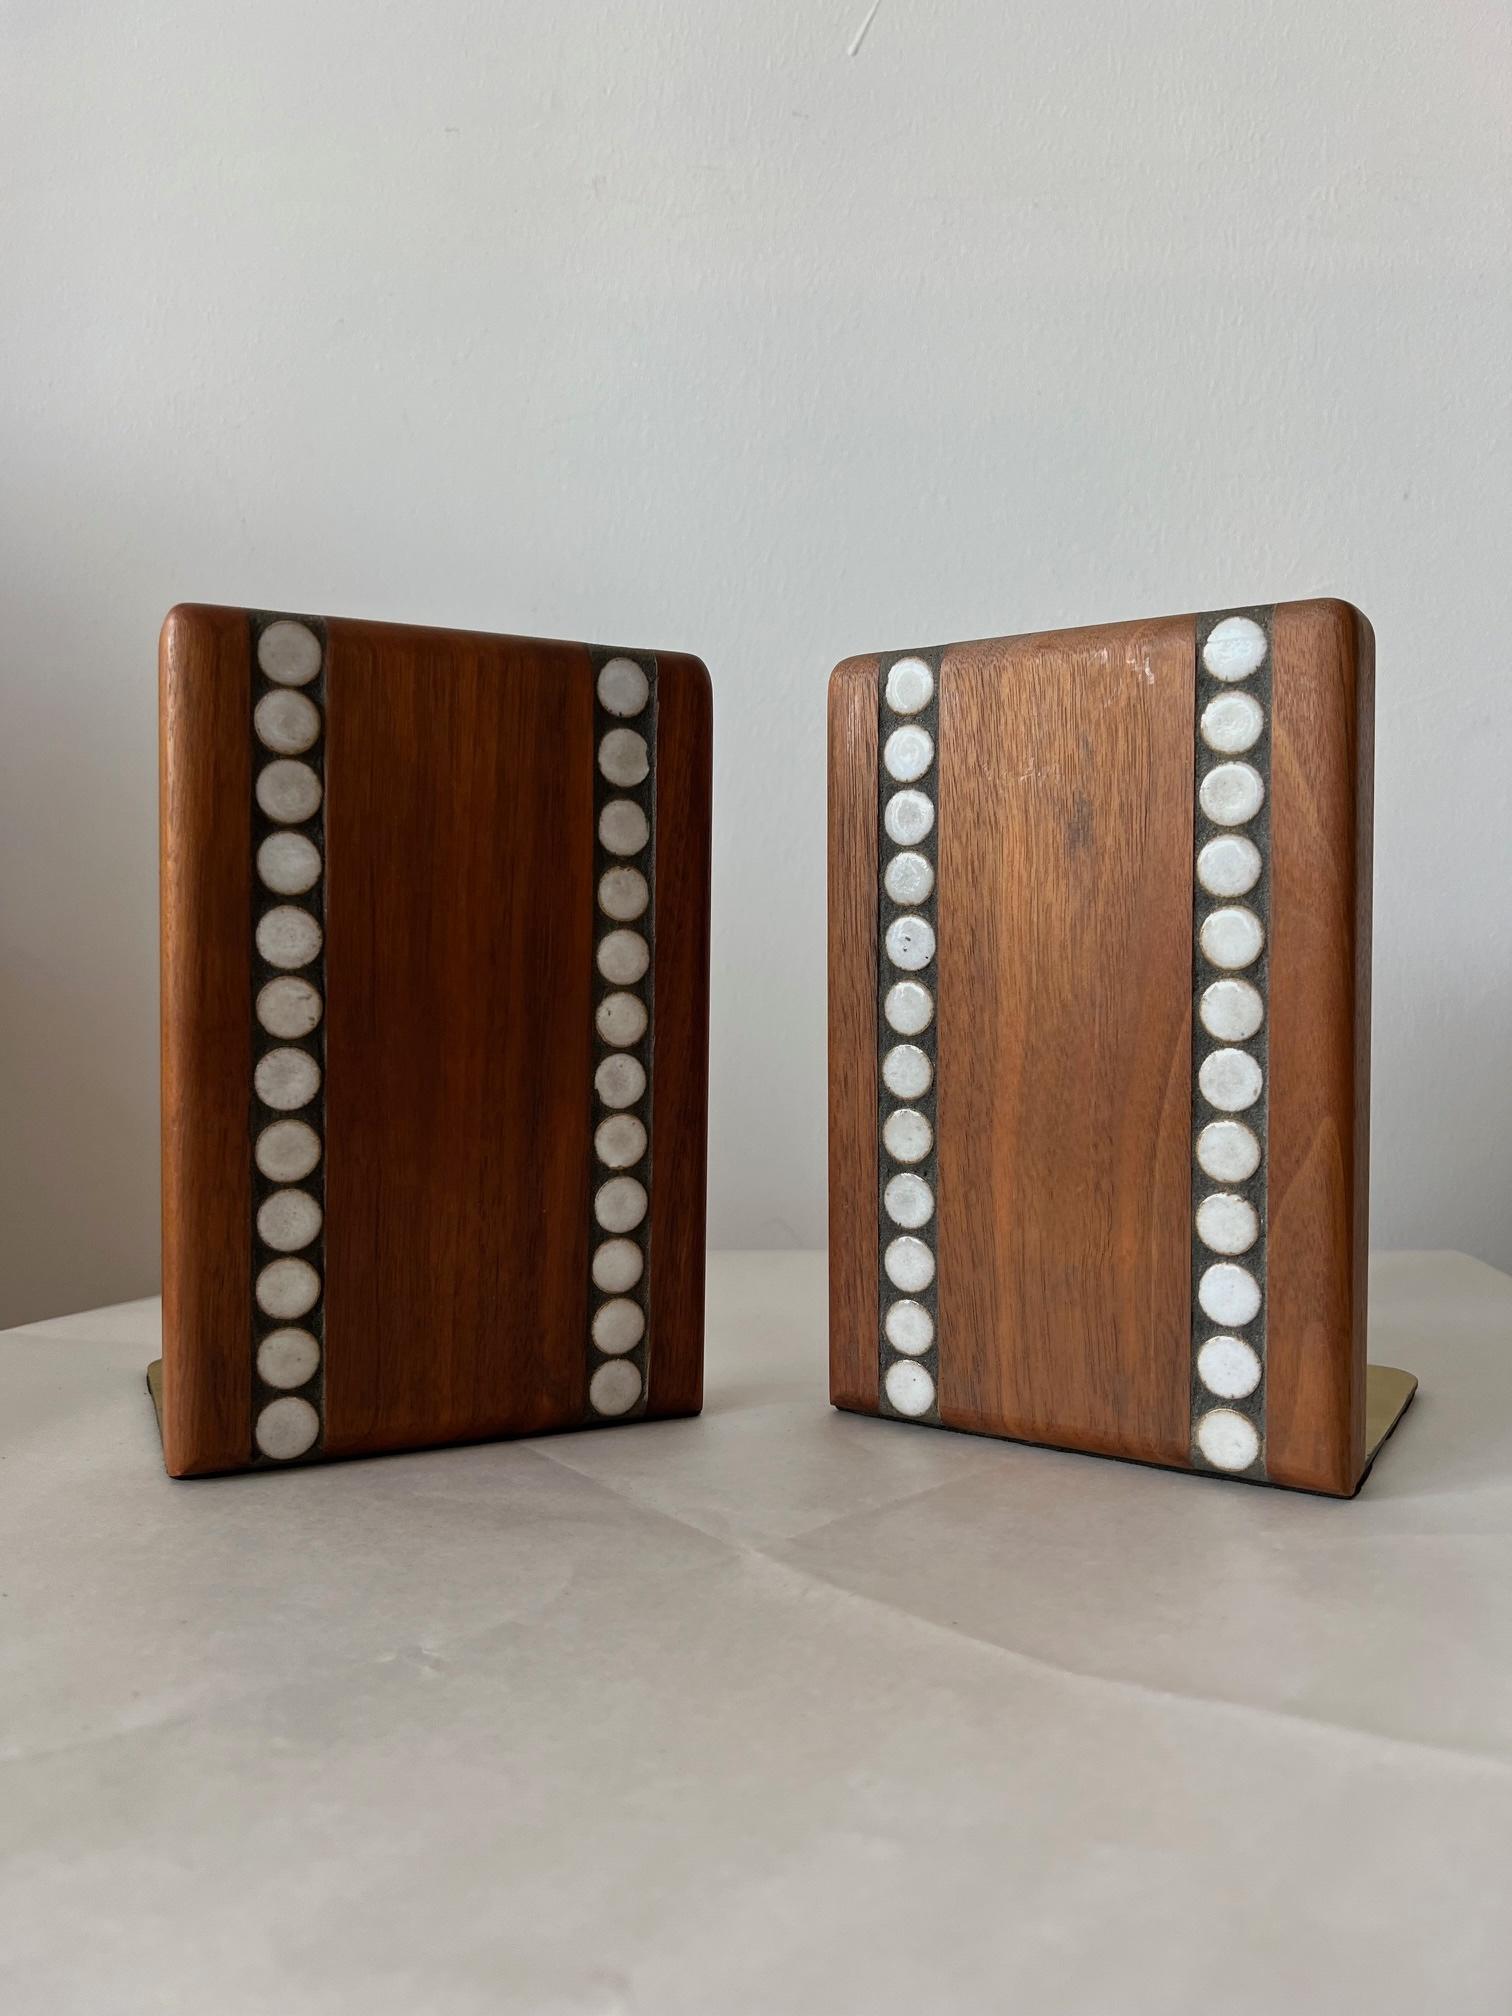 A pair of stylish, 1950s bookends by Gordon Martz. Circular pattern, white ceramic tiles, inset into walnut frames, with brass extensions. Heavy and well made.